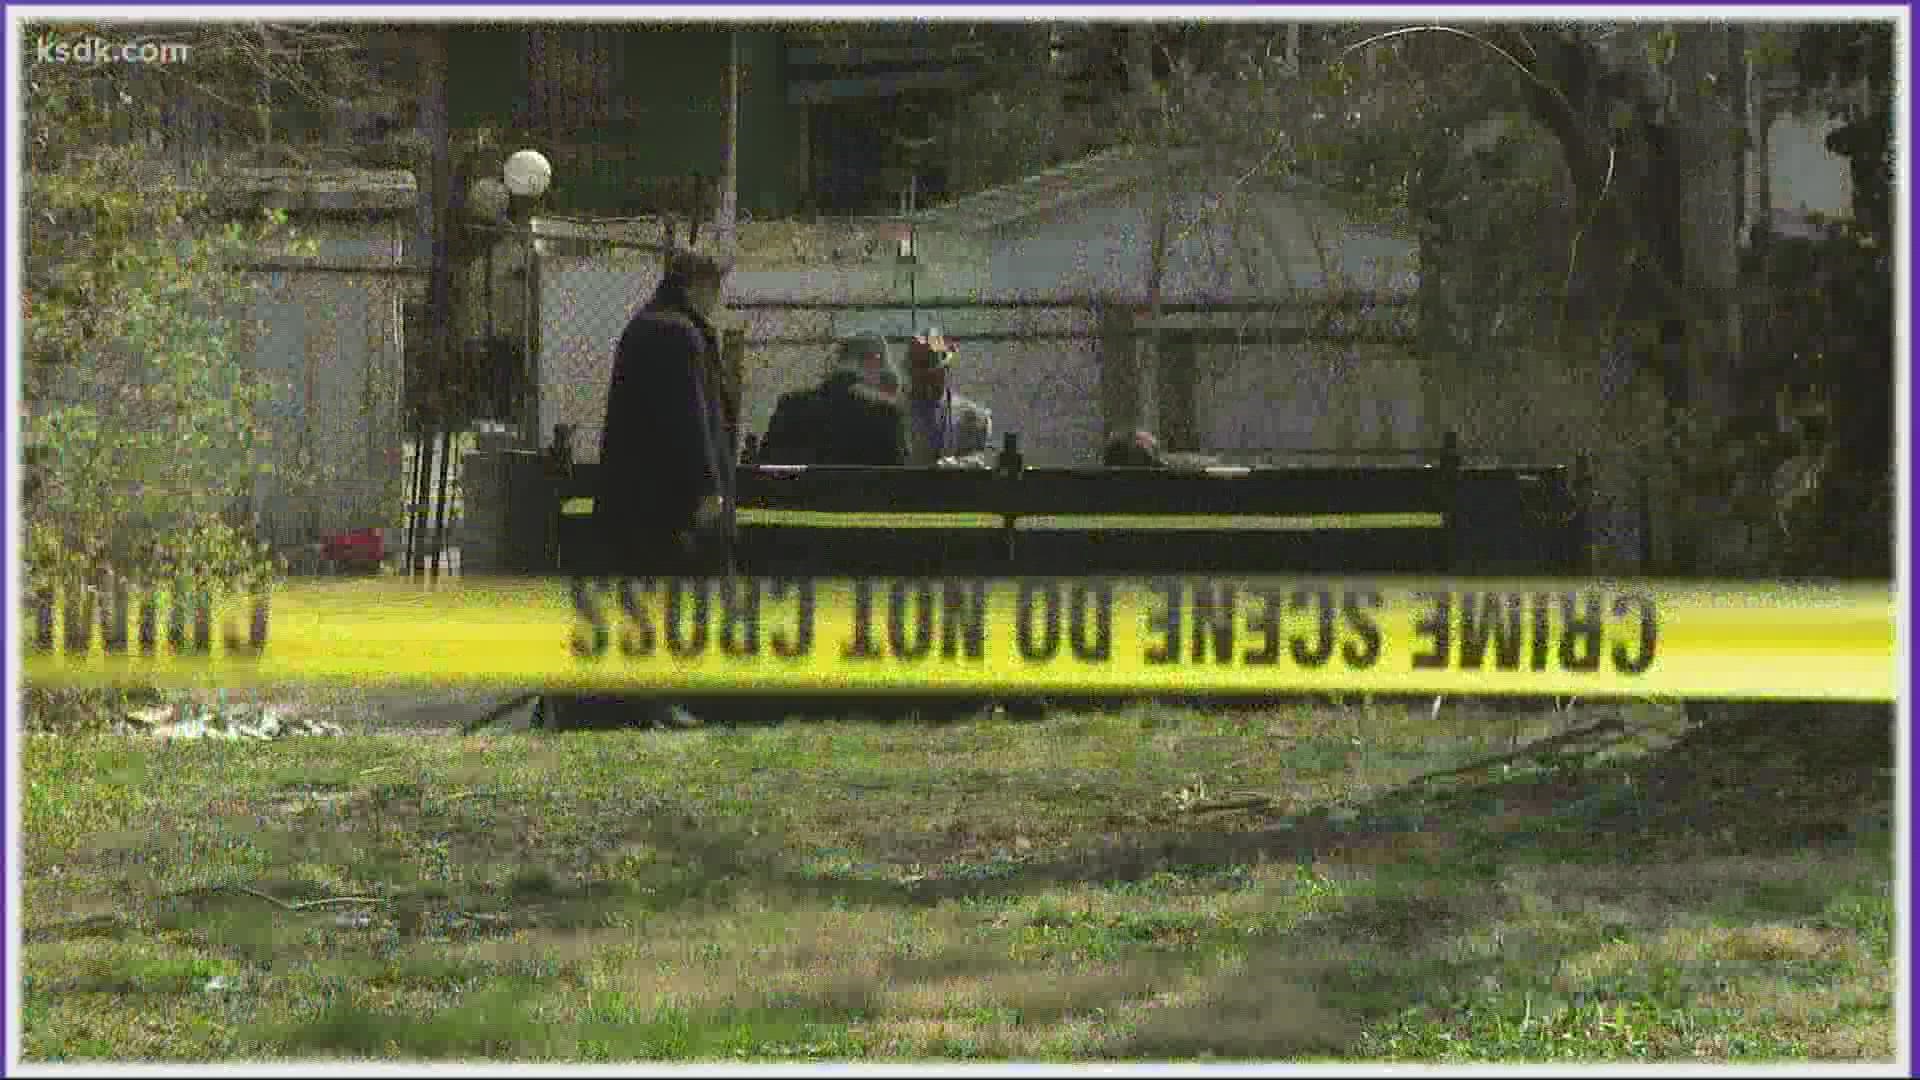 A man was killed just before 10 a.m. Saturday. Police are investigating.